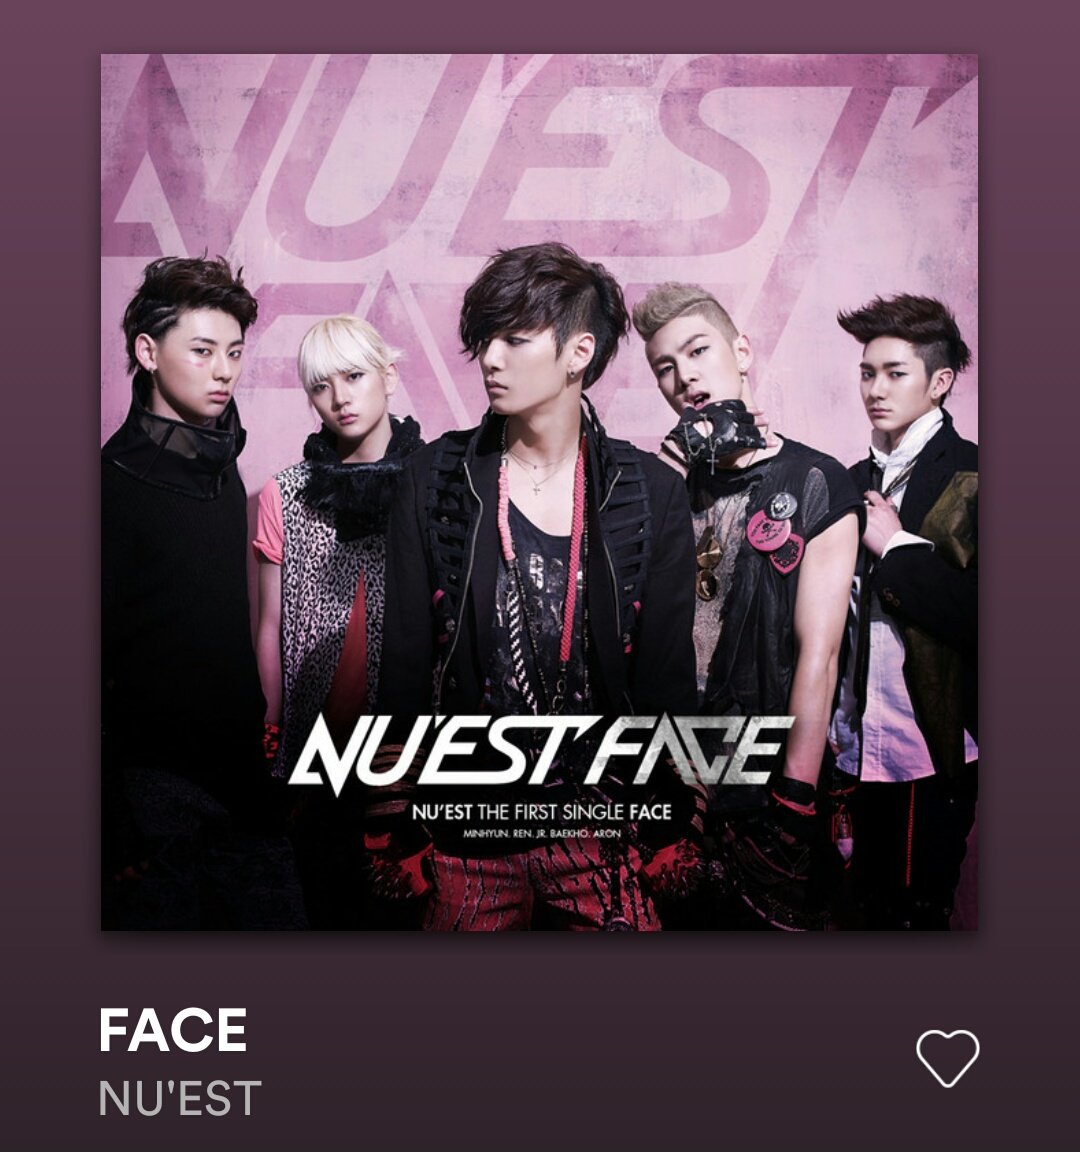 if your favorite song is face: you are either loyal or that's the only song you know about them